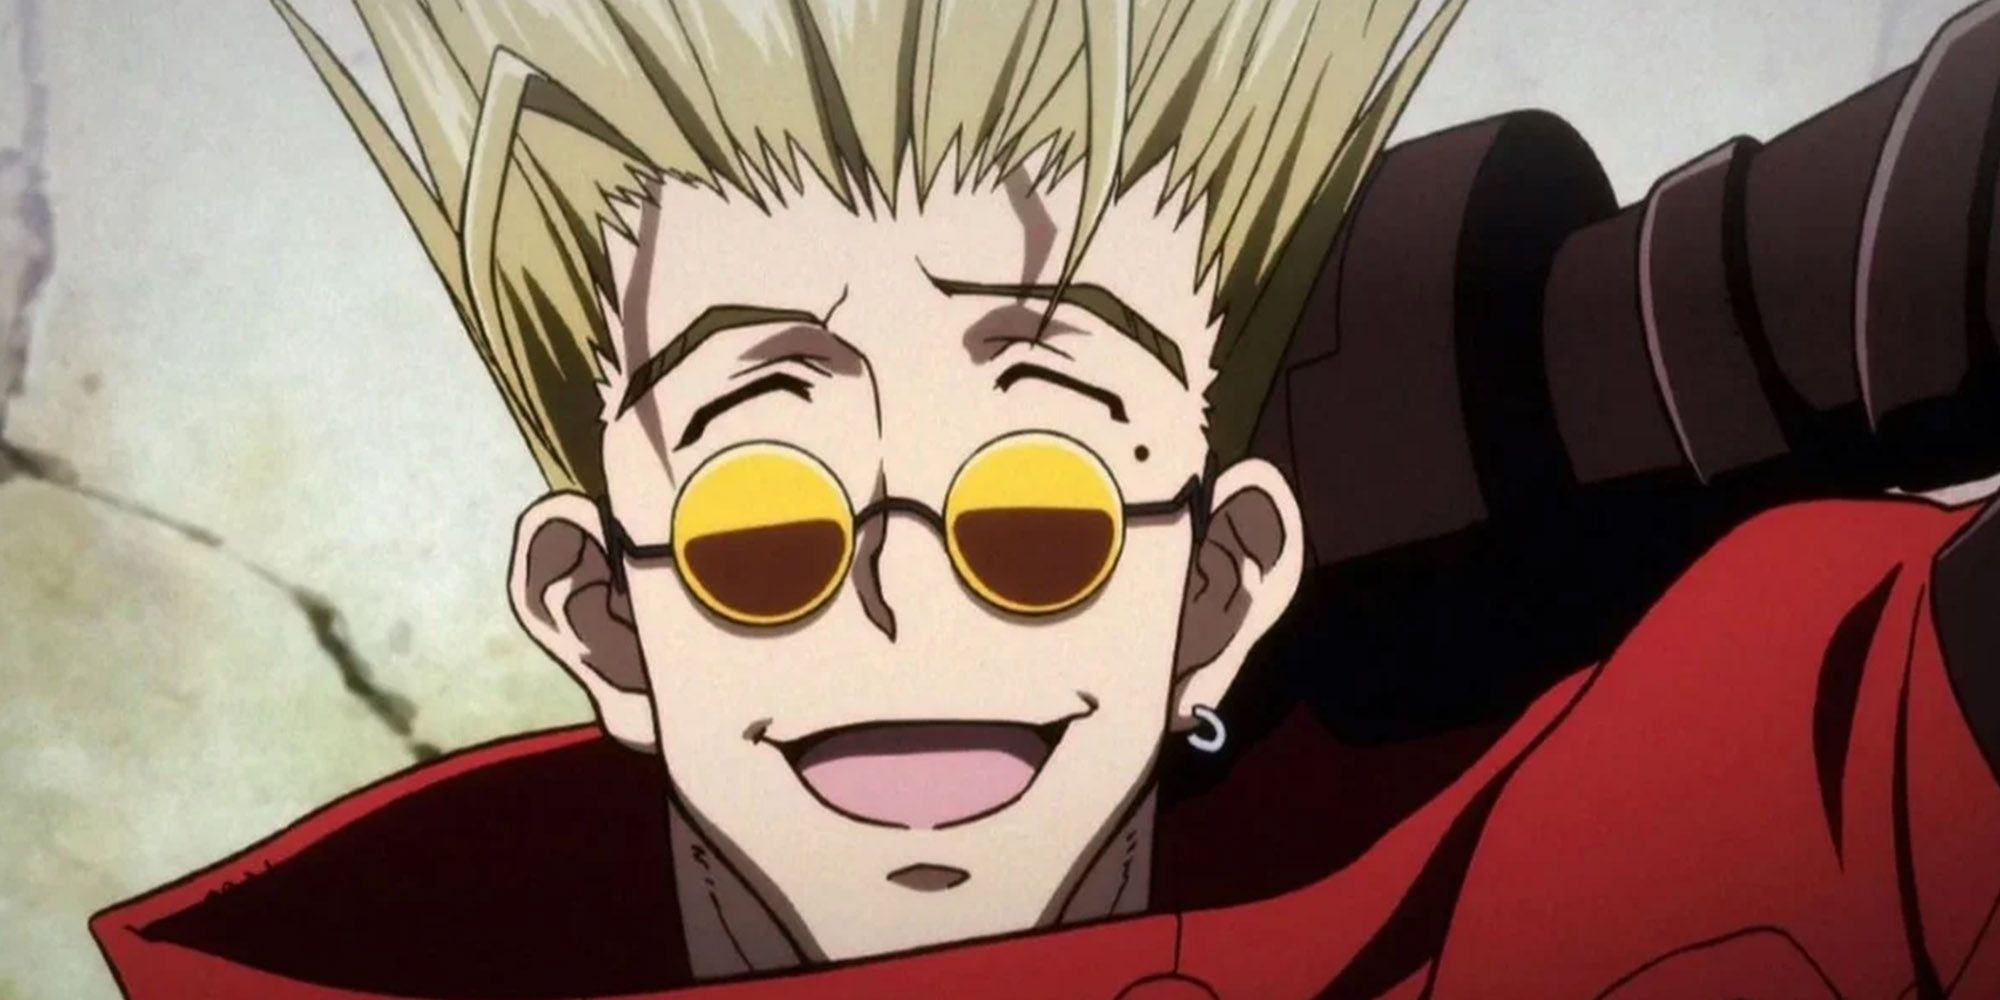 Vash The Stampede Looking All Goffy And Happy